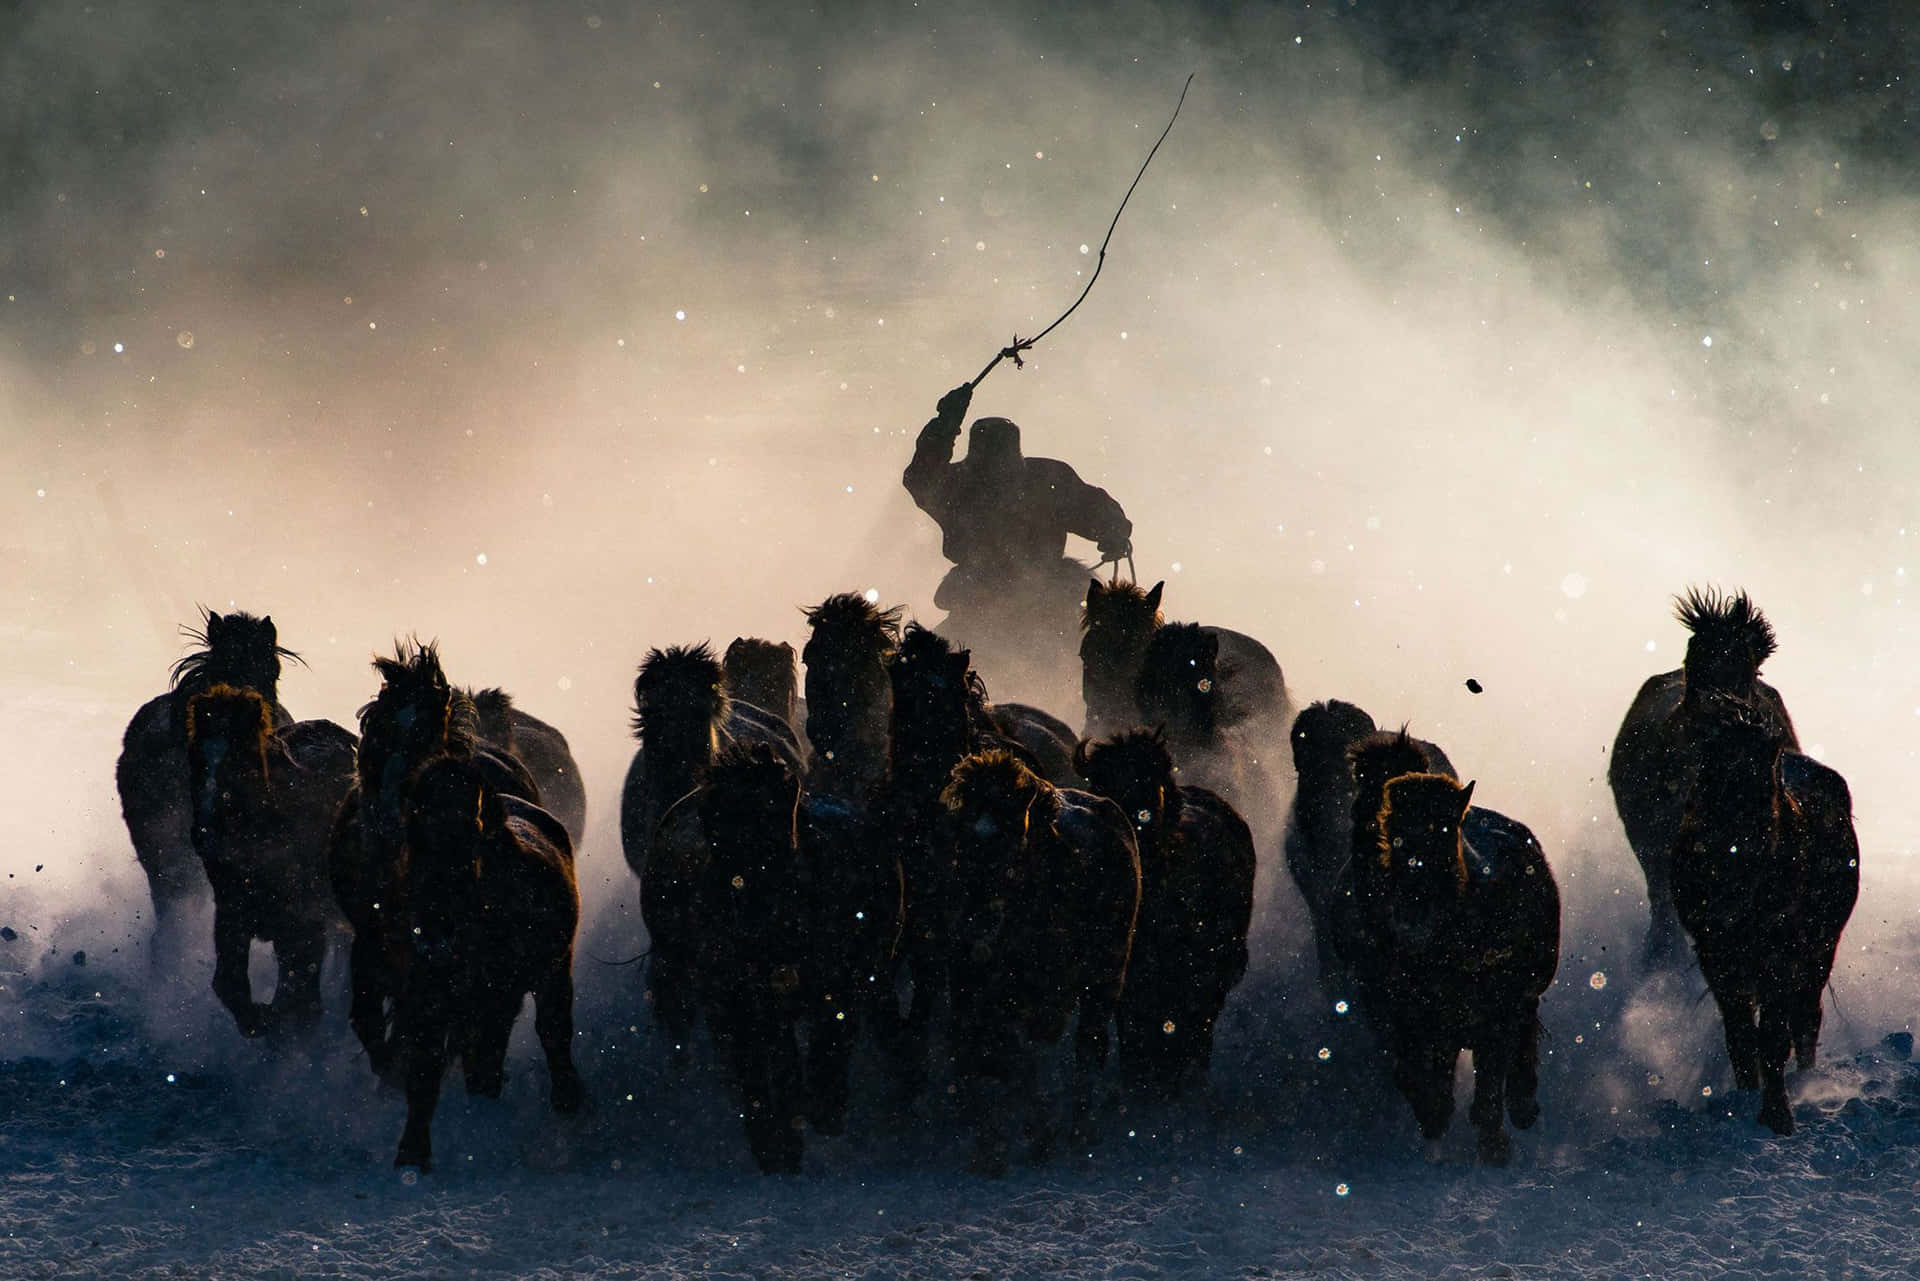 A Man Is Leading A Group Of Horses